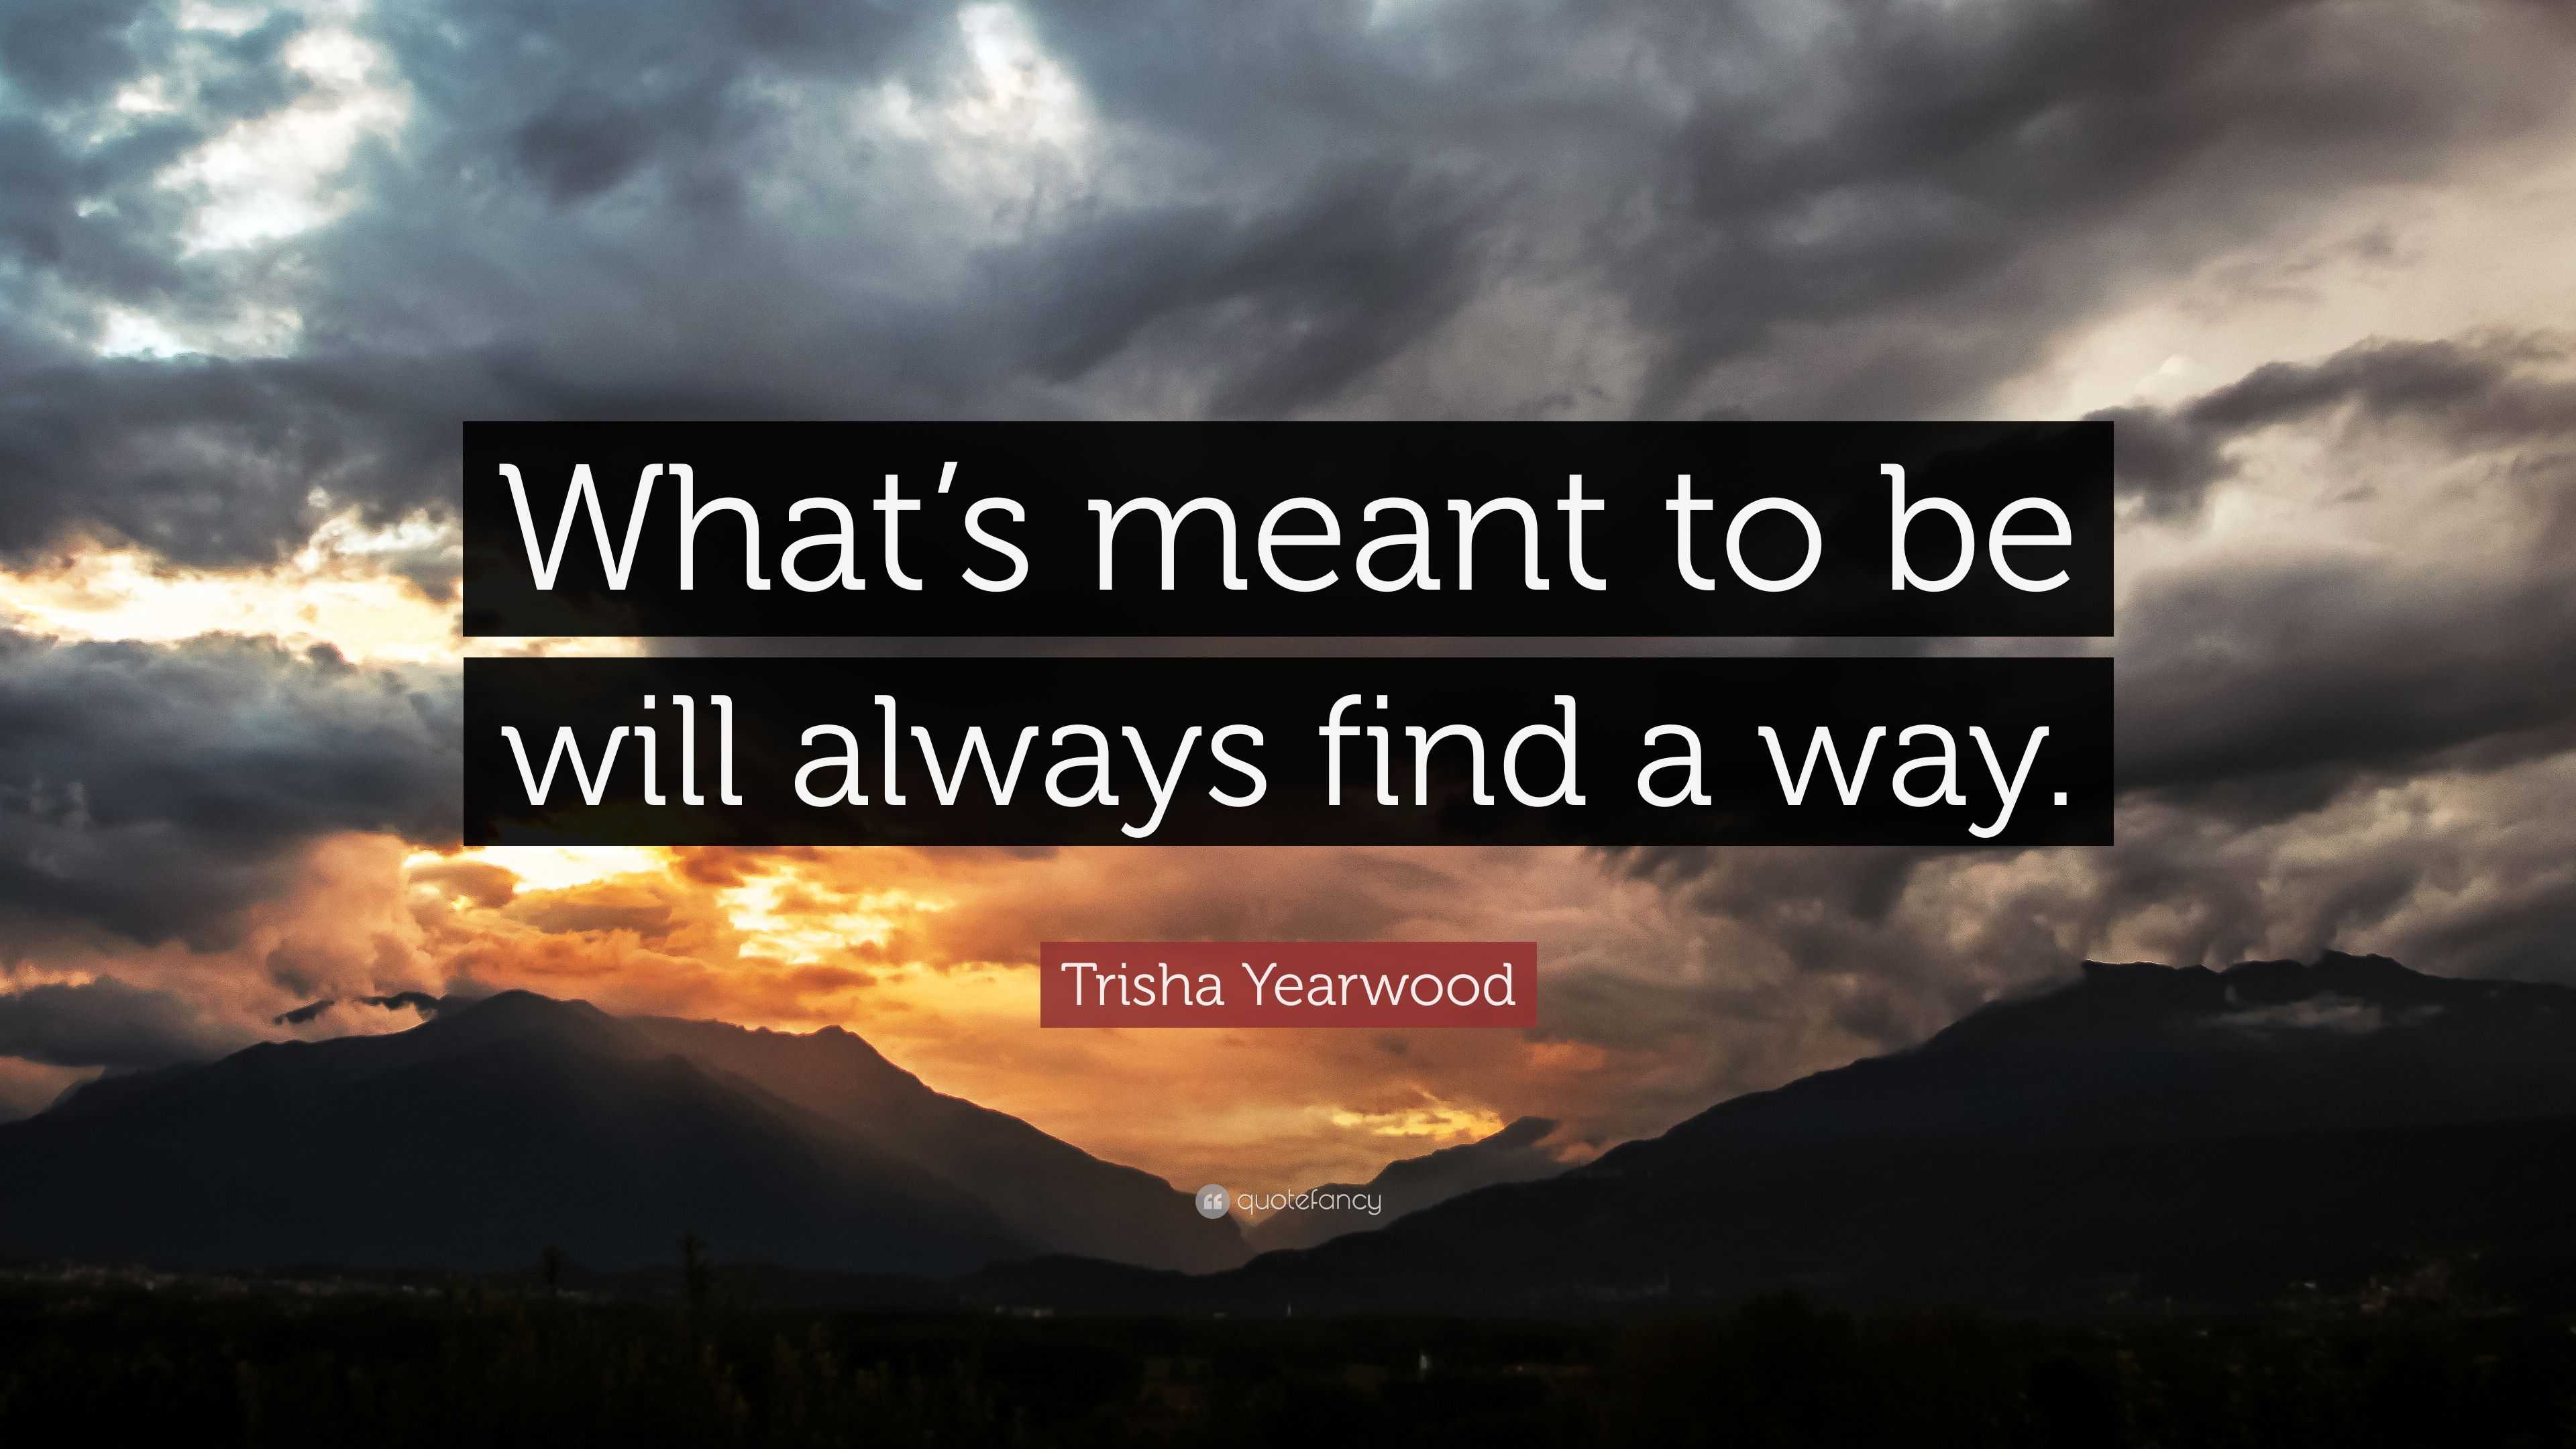 Trisha Yearwood Quote: “What’s meant to be will always find a way.”